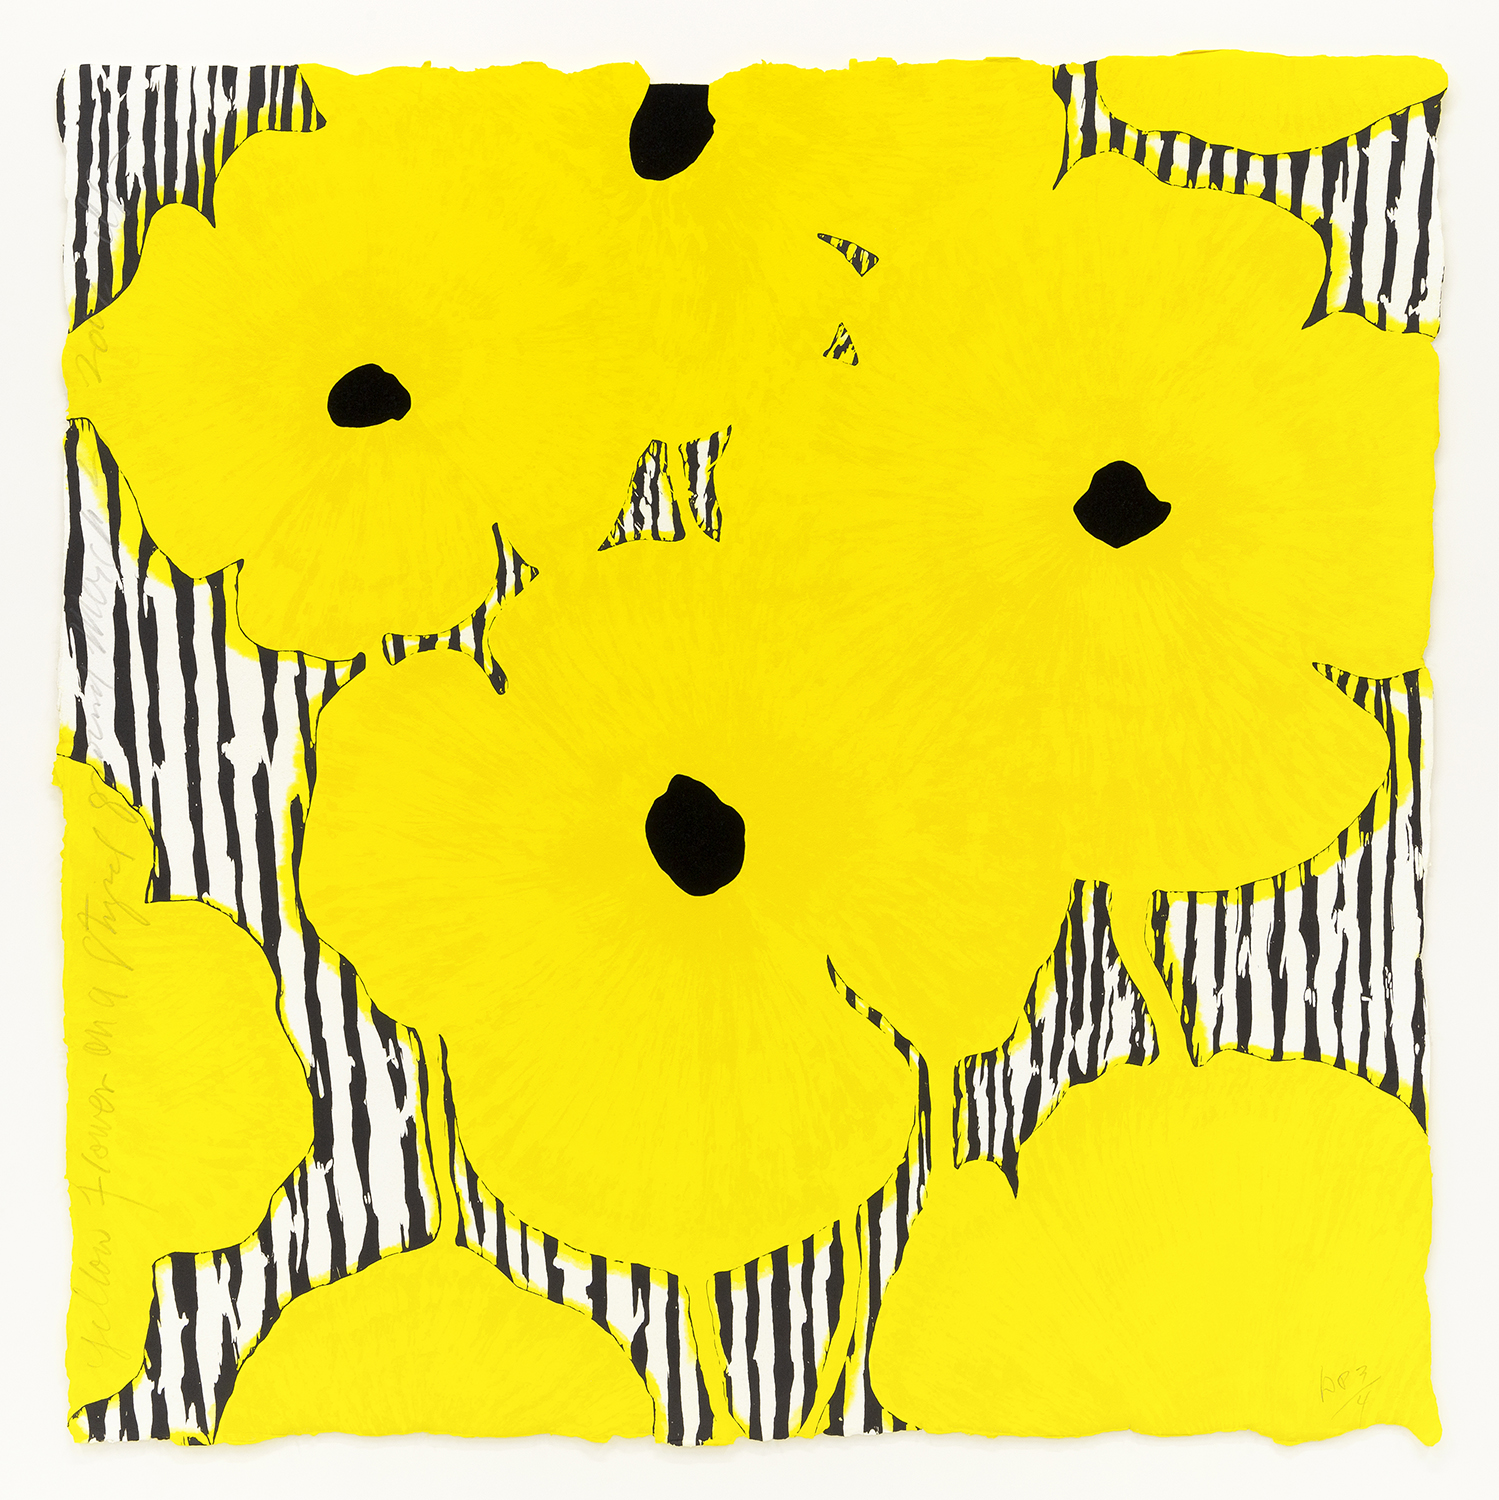 Yellow Flowers on a Striped Ground March, 27, 2002, 2002, Woodcut in five colors, sprayed paper pulp, and flocking on handmade paper 50 x 50 inches (127 x 127 cm) Edition of 12